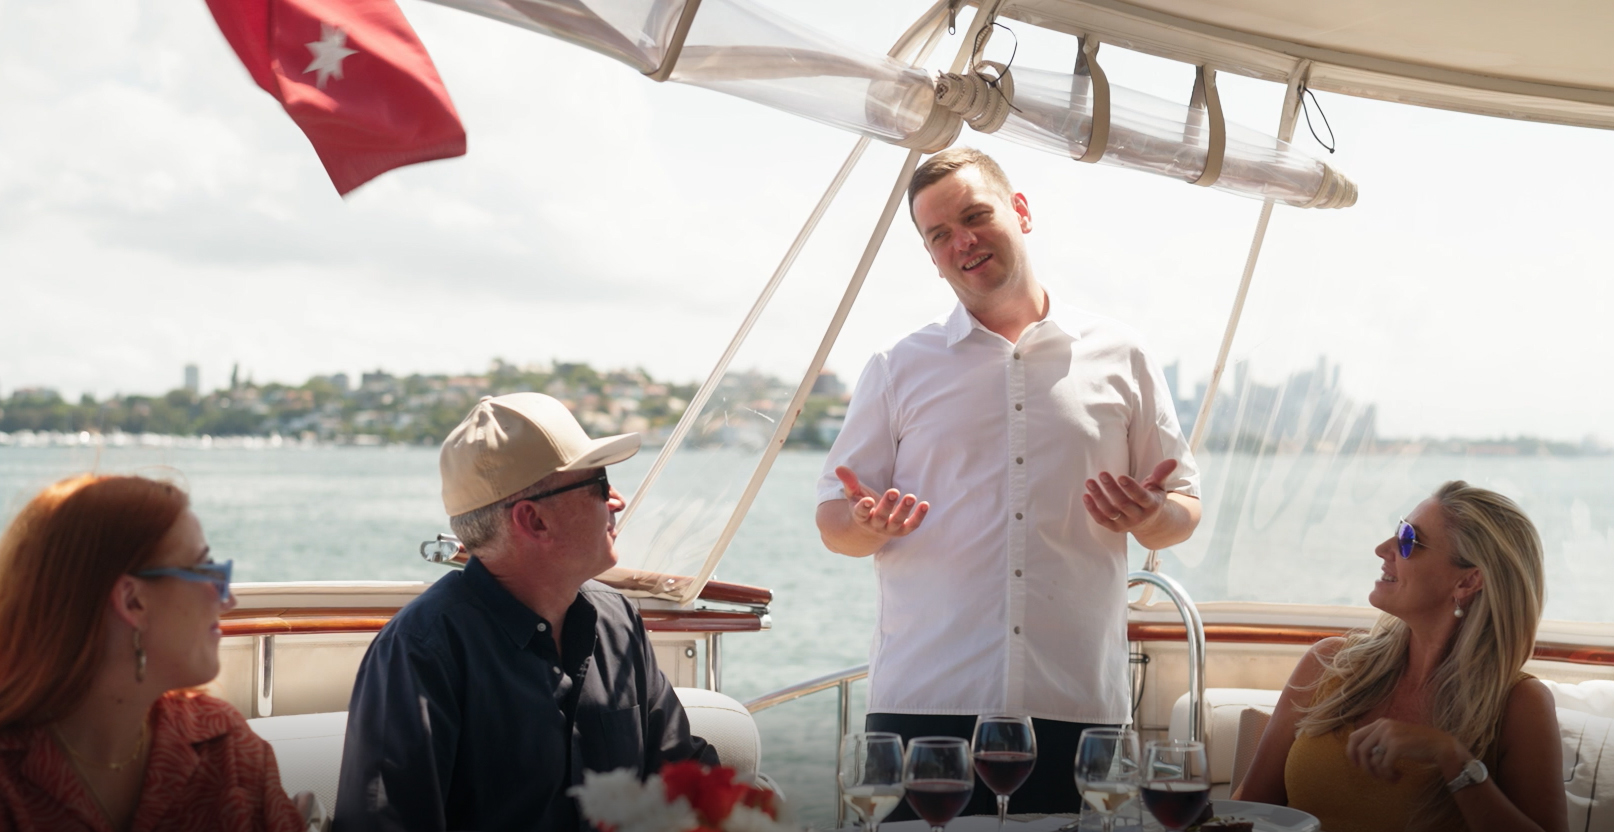 Chefs on Board: Nick Mahlook, Public Hospitality